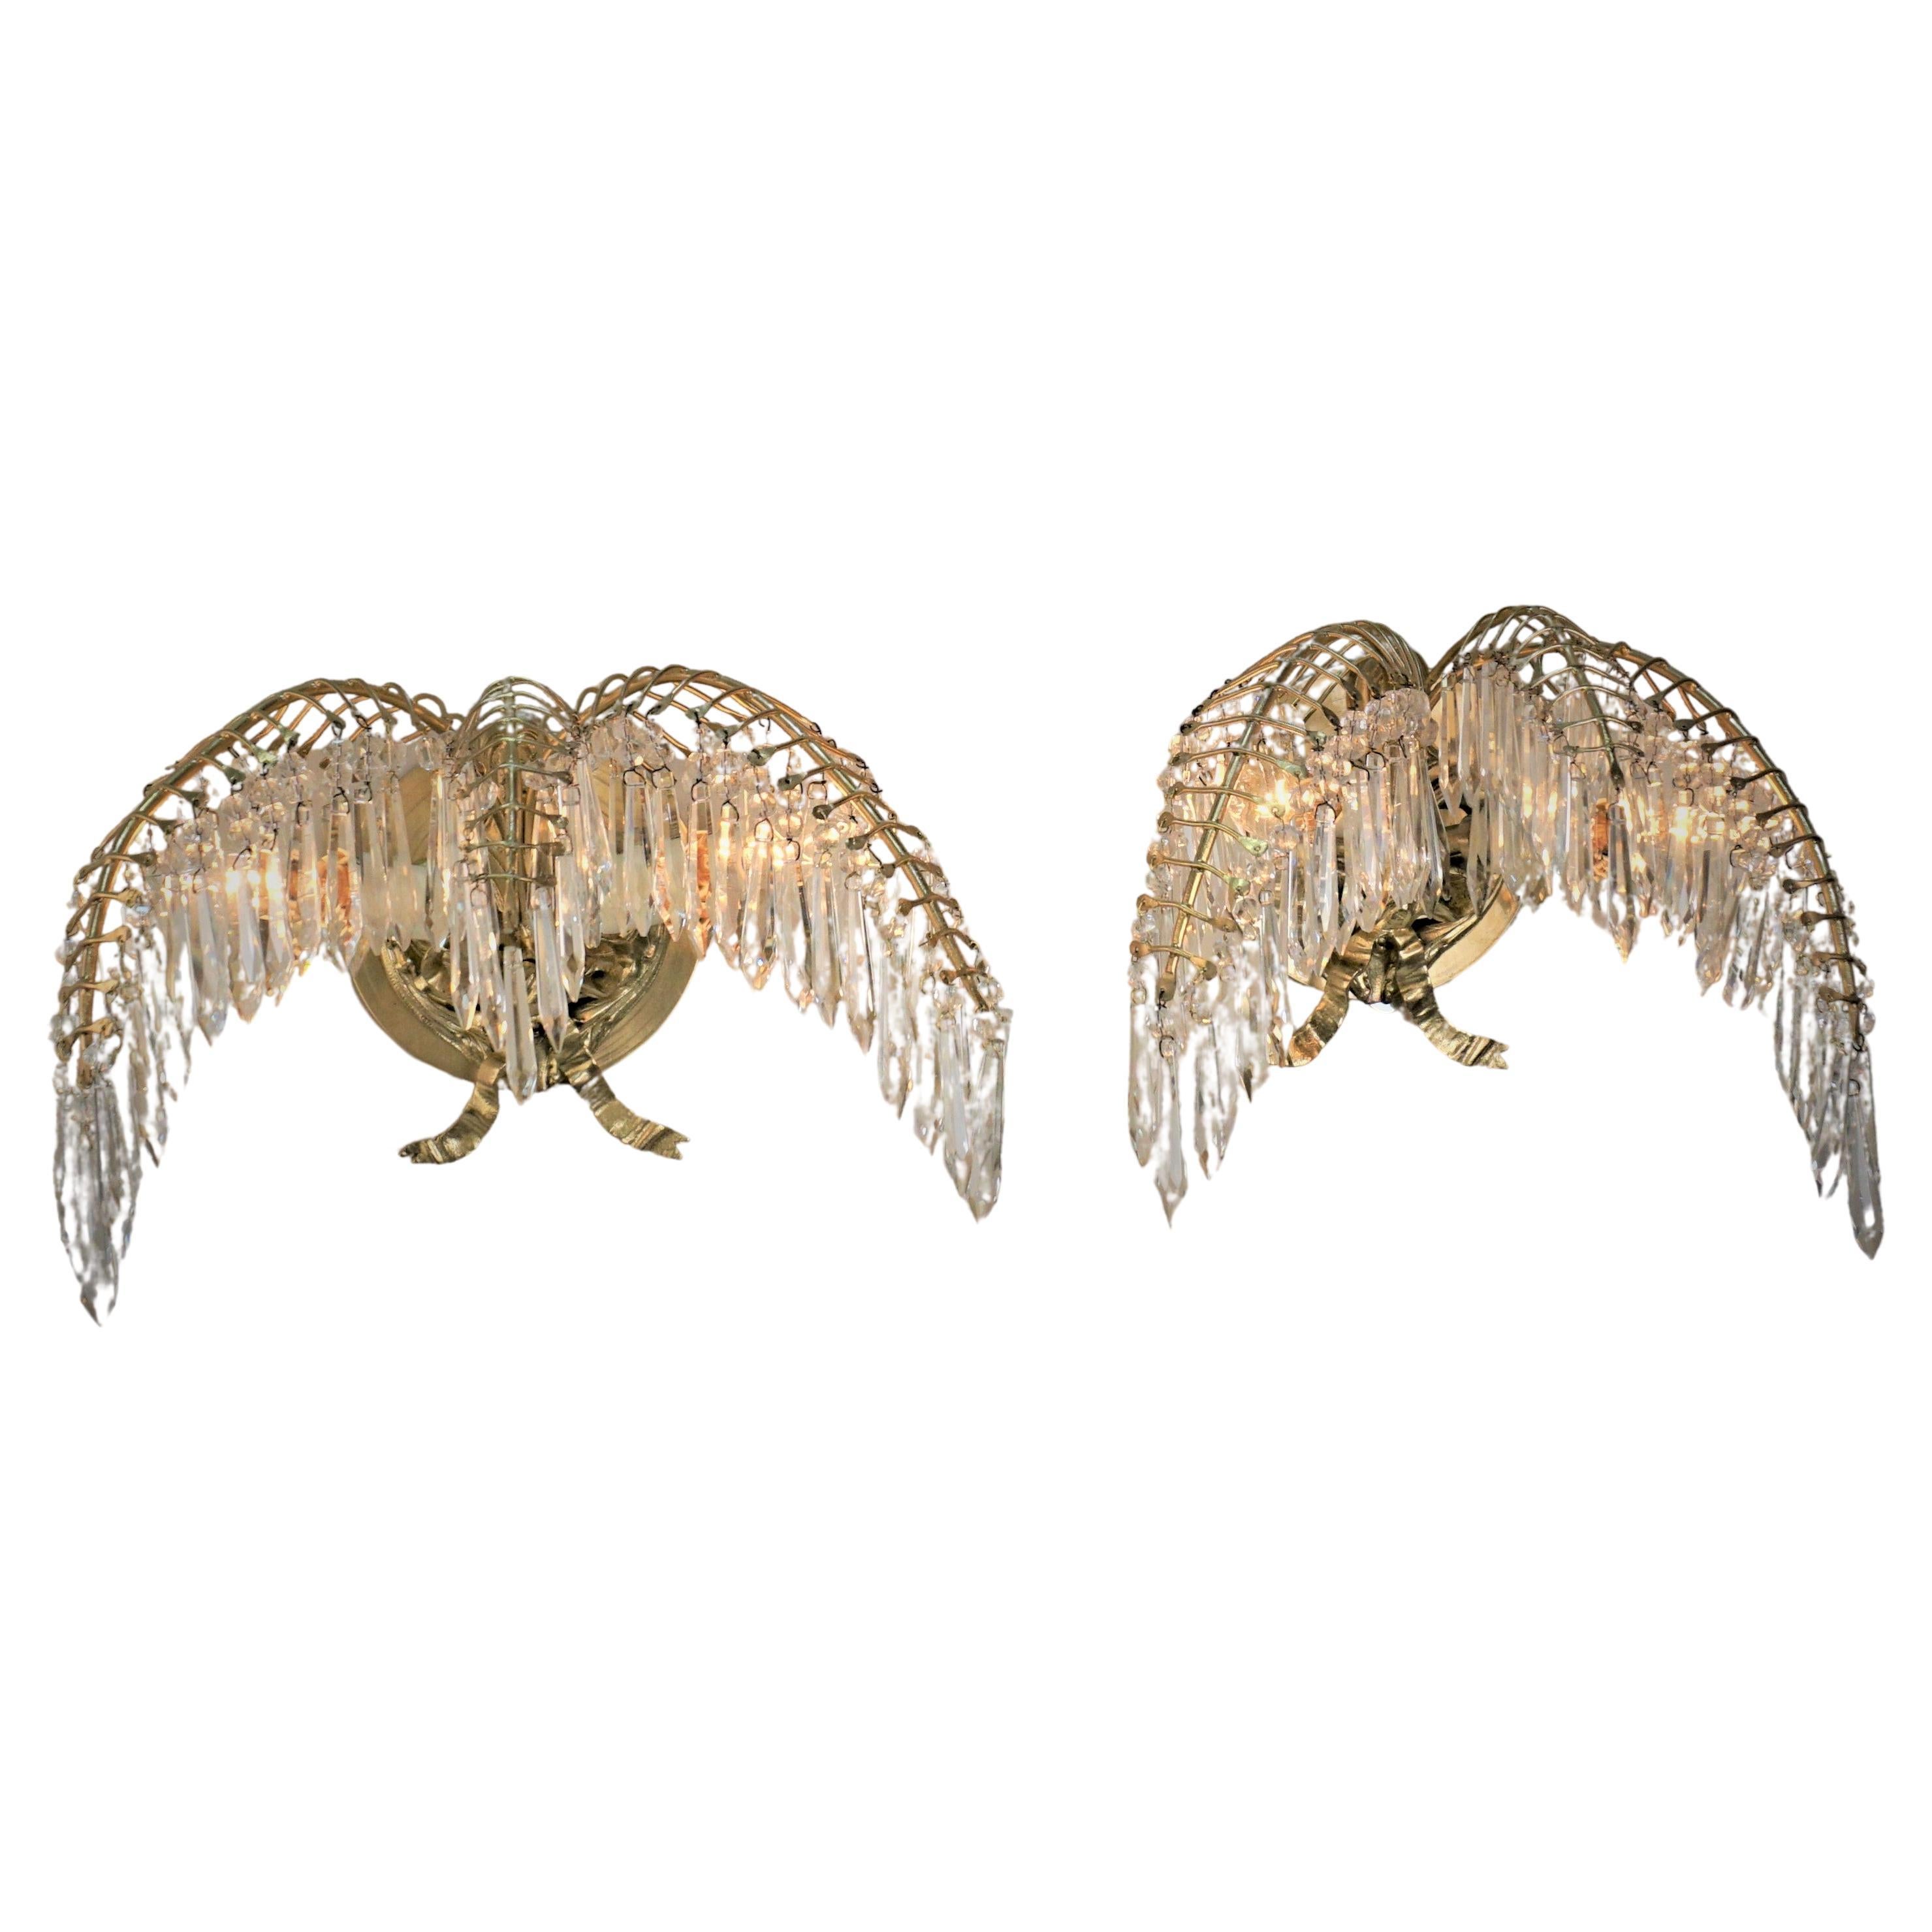 Pair of Bagues Style Bronze and Crystal Wall Sconces For Sale